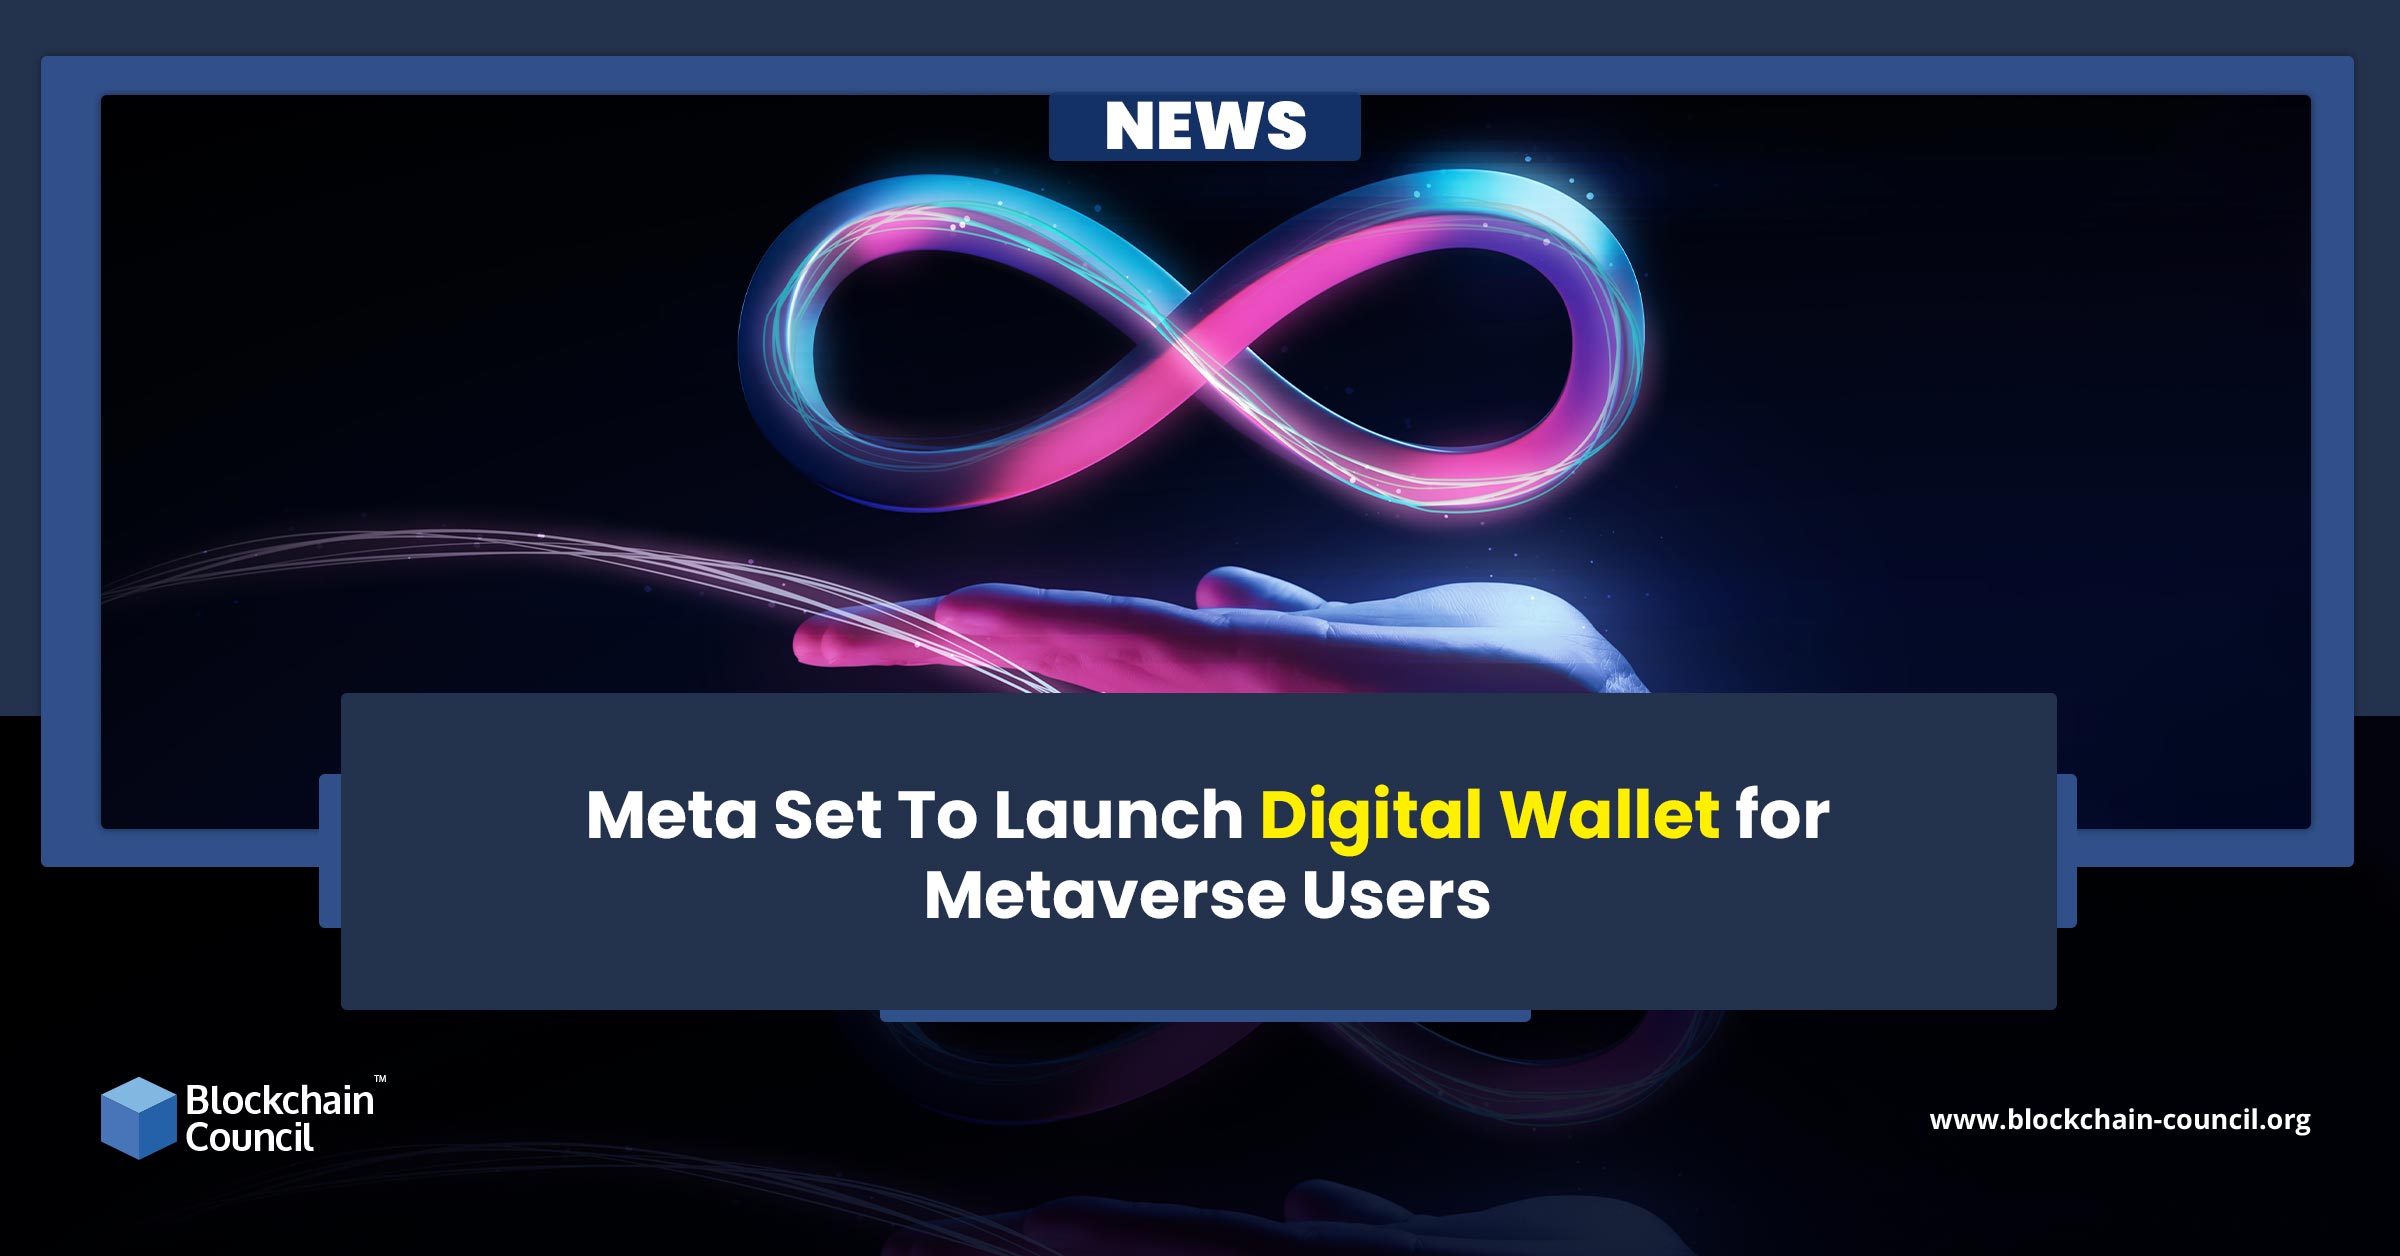 Meta Set To Launch Digital Wallet for Metaverse Users